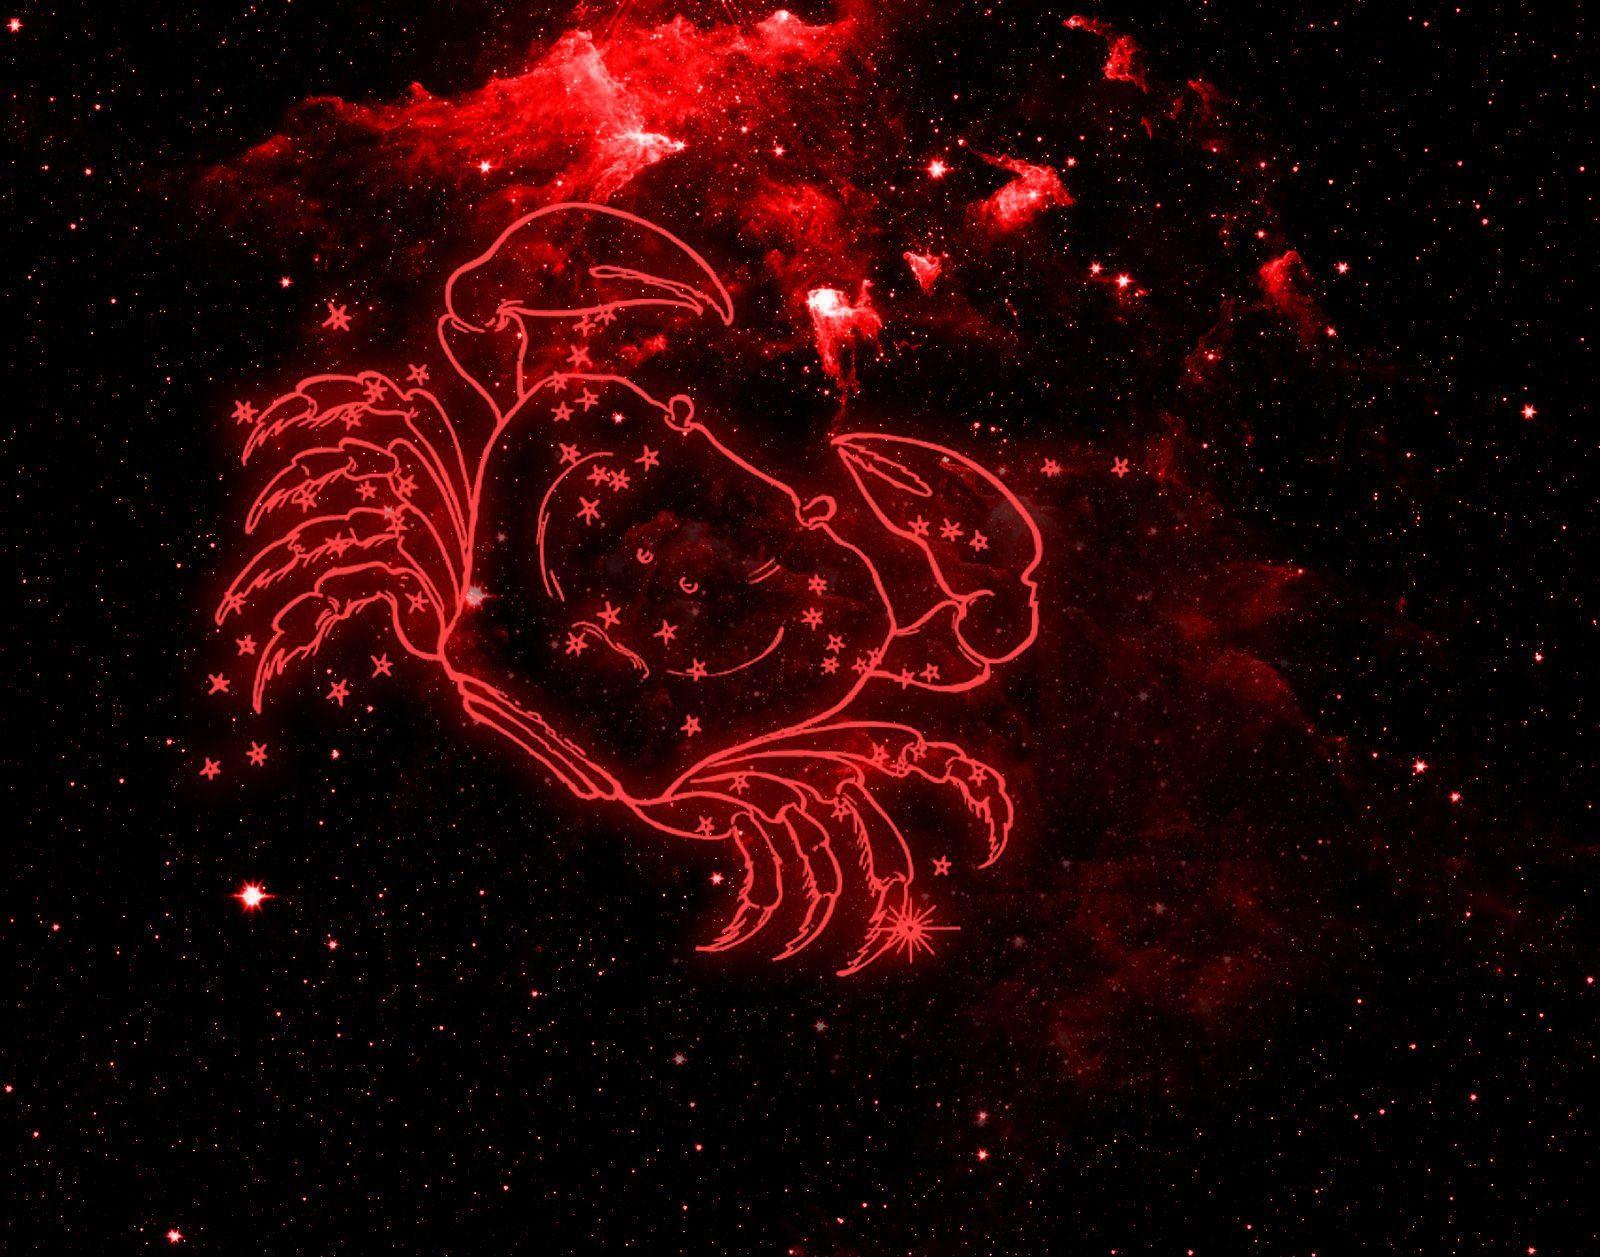 Red crab zodiac sign on a black background with stars - Cancer